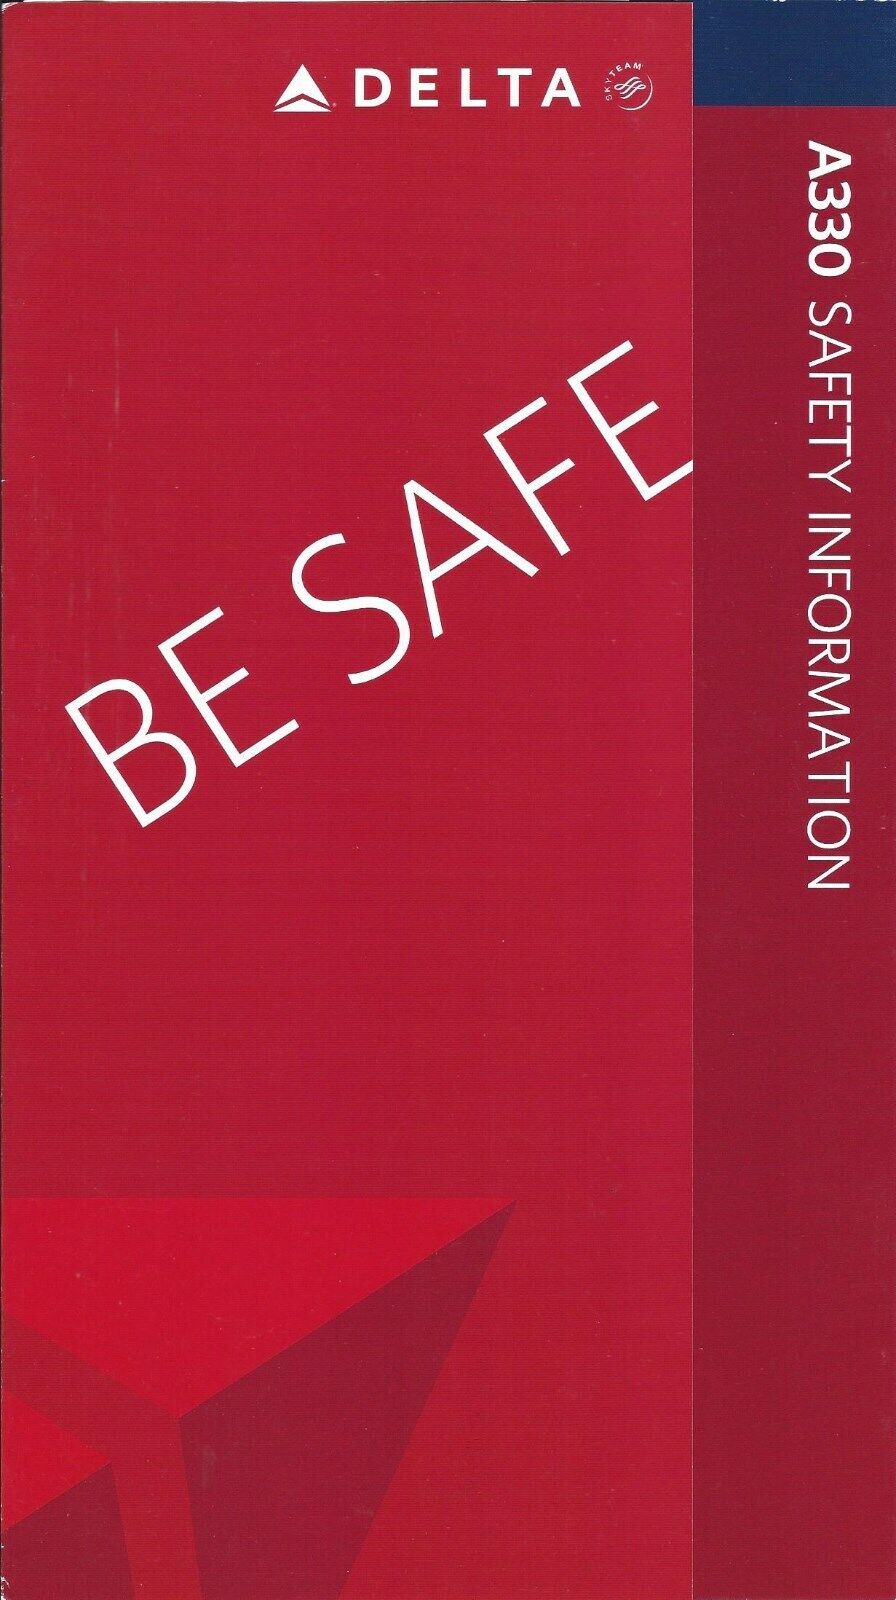 Safety Card - Delta - A330 - 2009 (S4119)